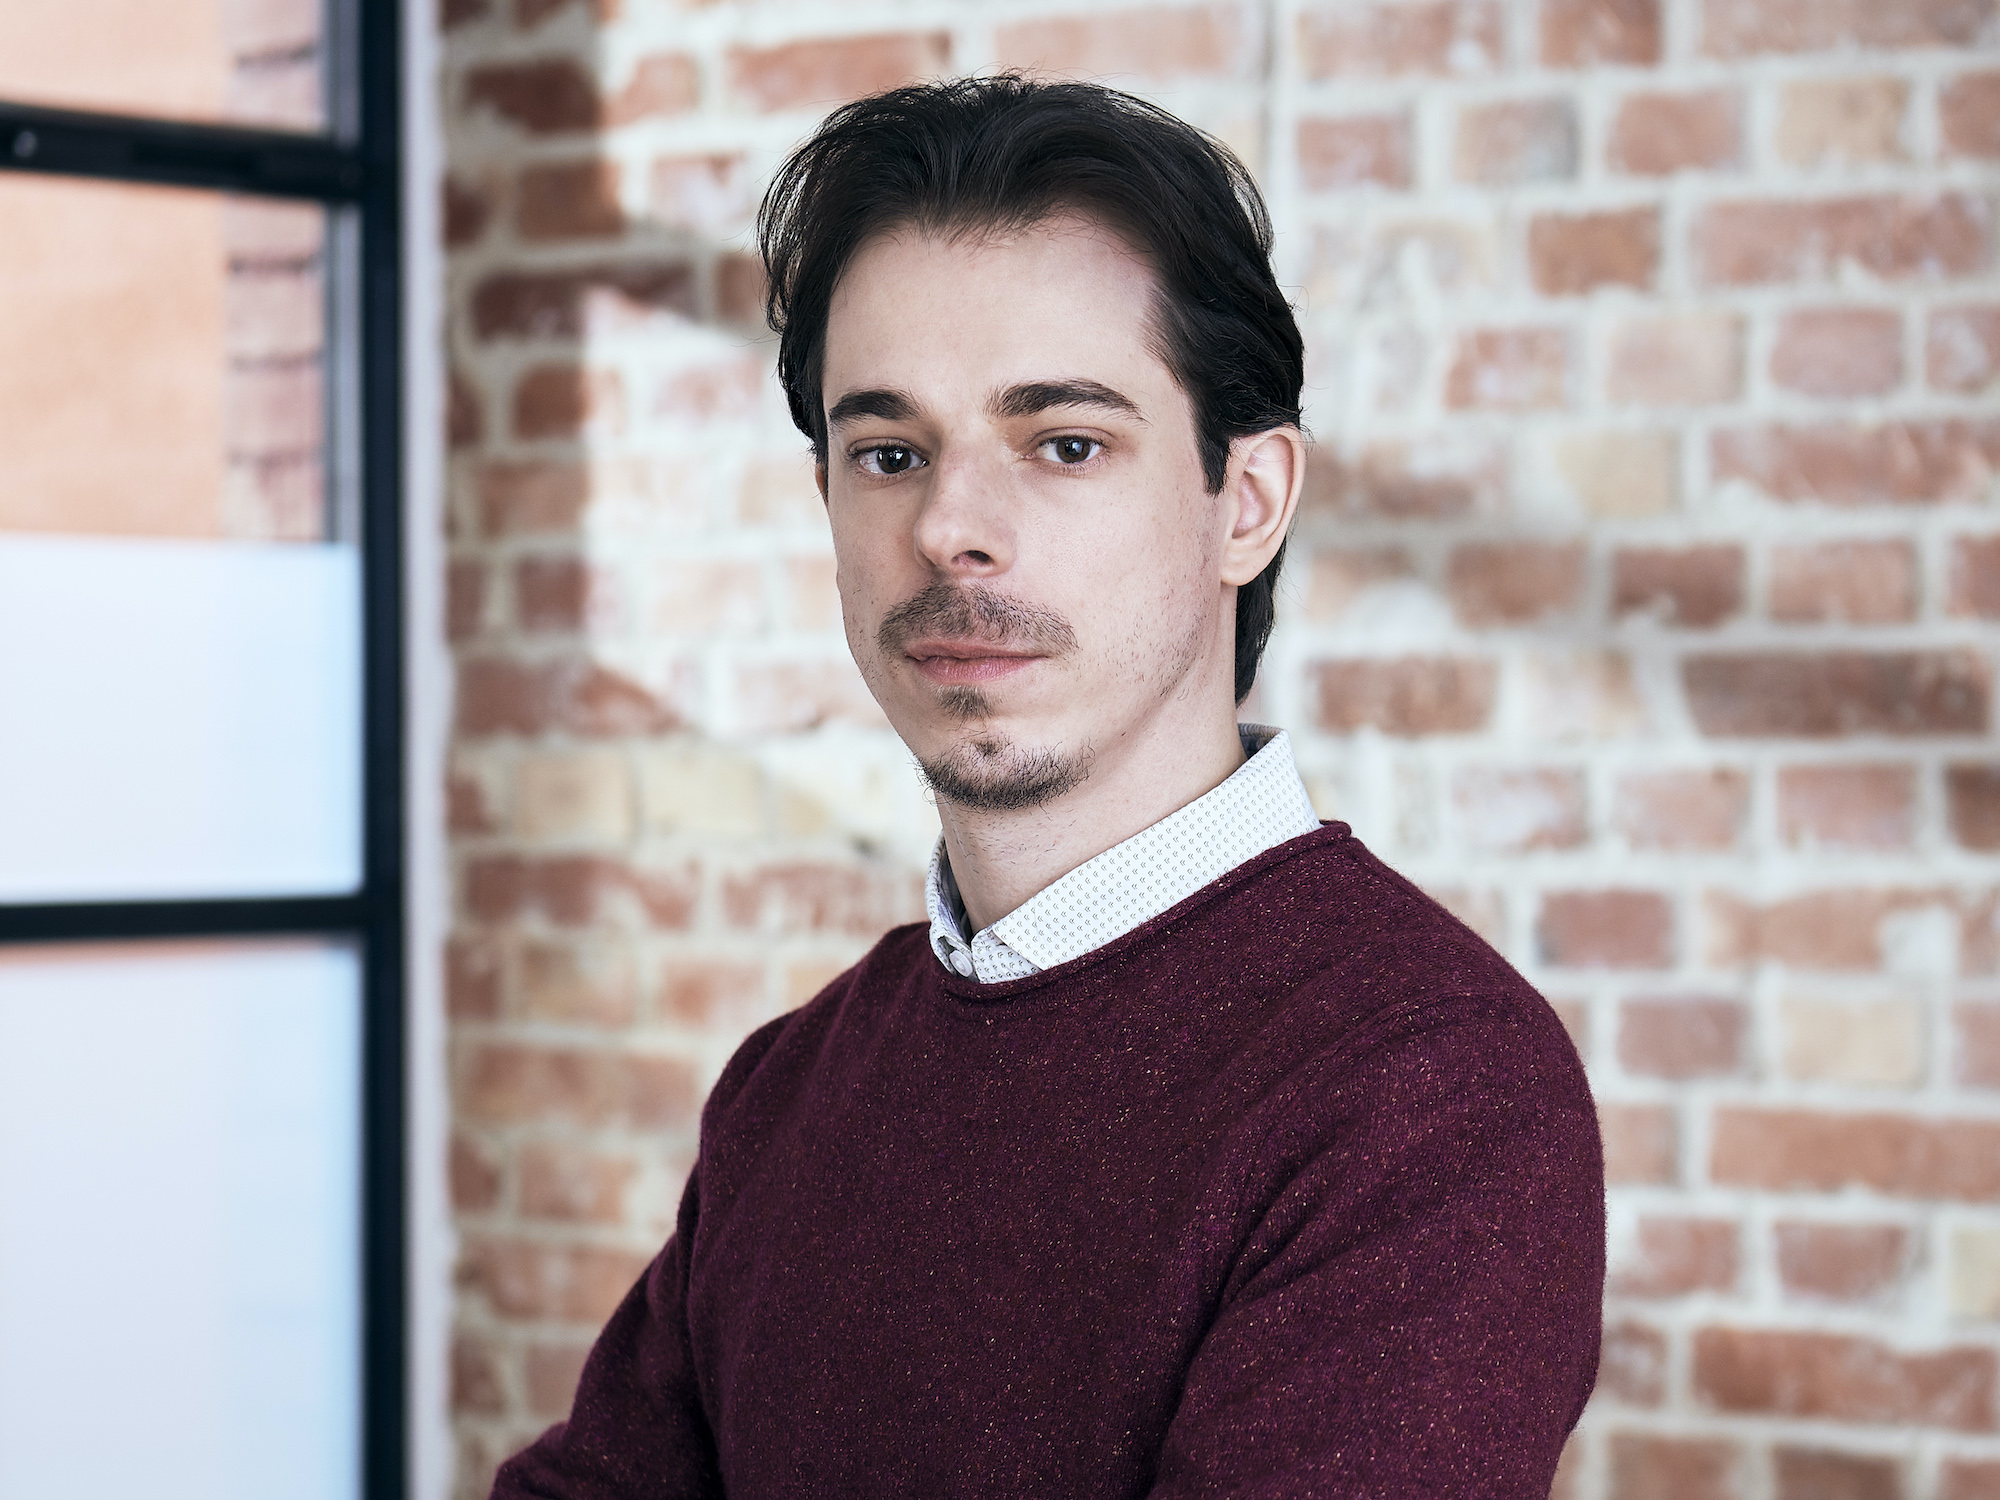 AnyDesk Founder and CEO, Philipp Weiser